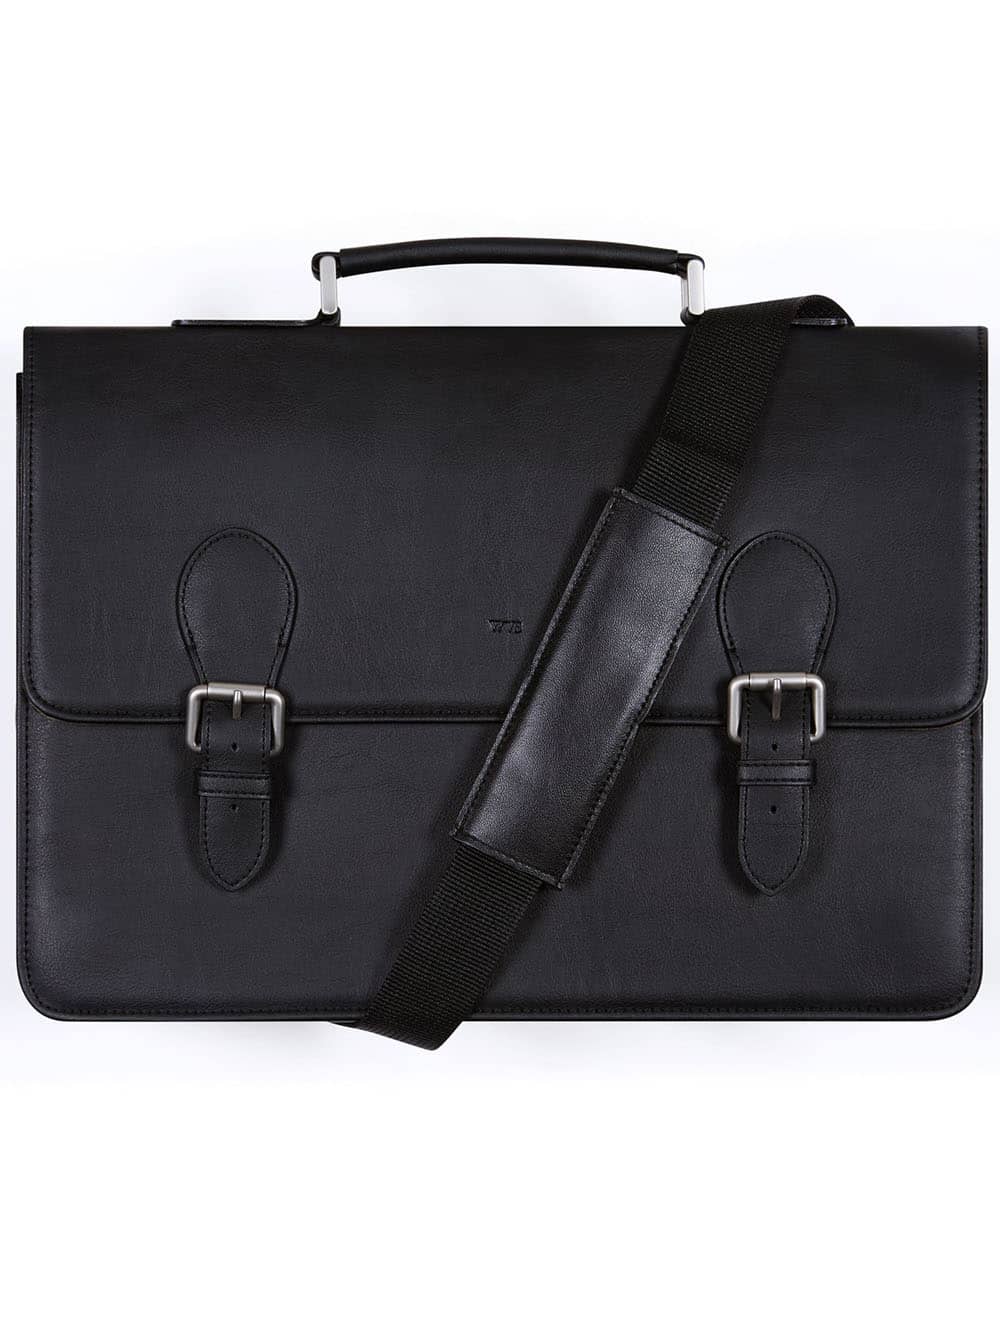 Black vegan leather briefcase with silver hardware and black strap